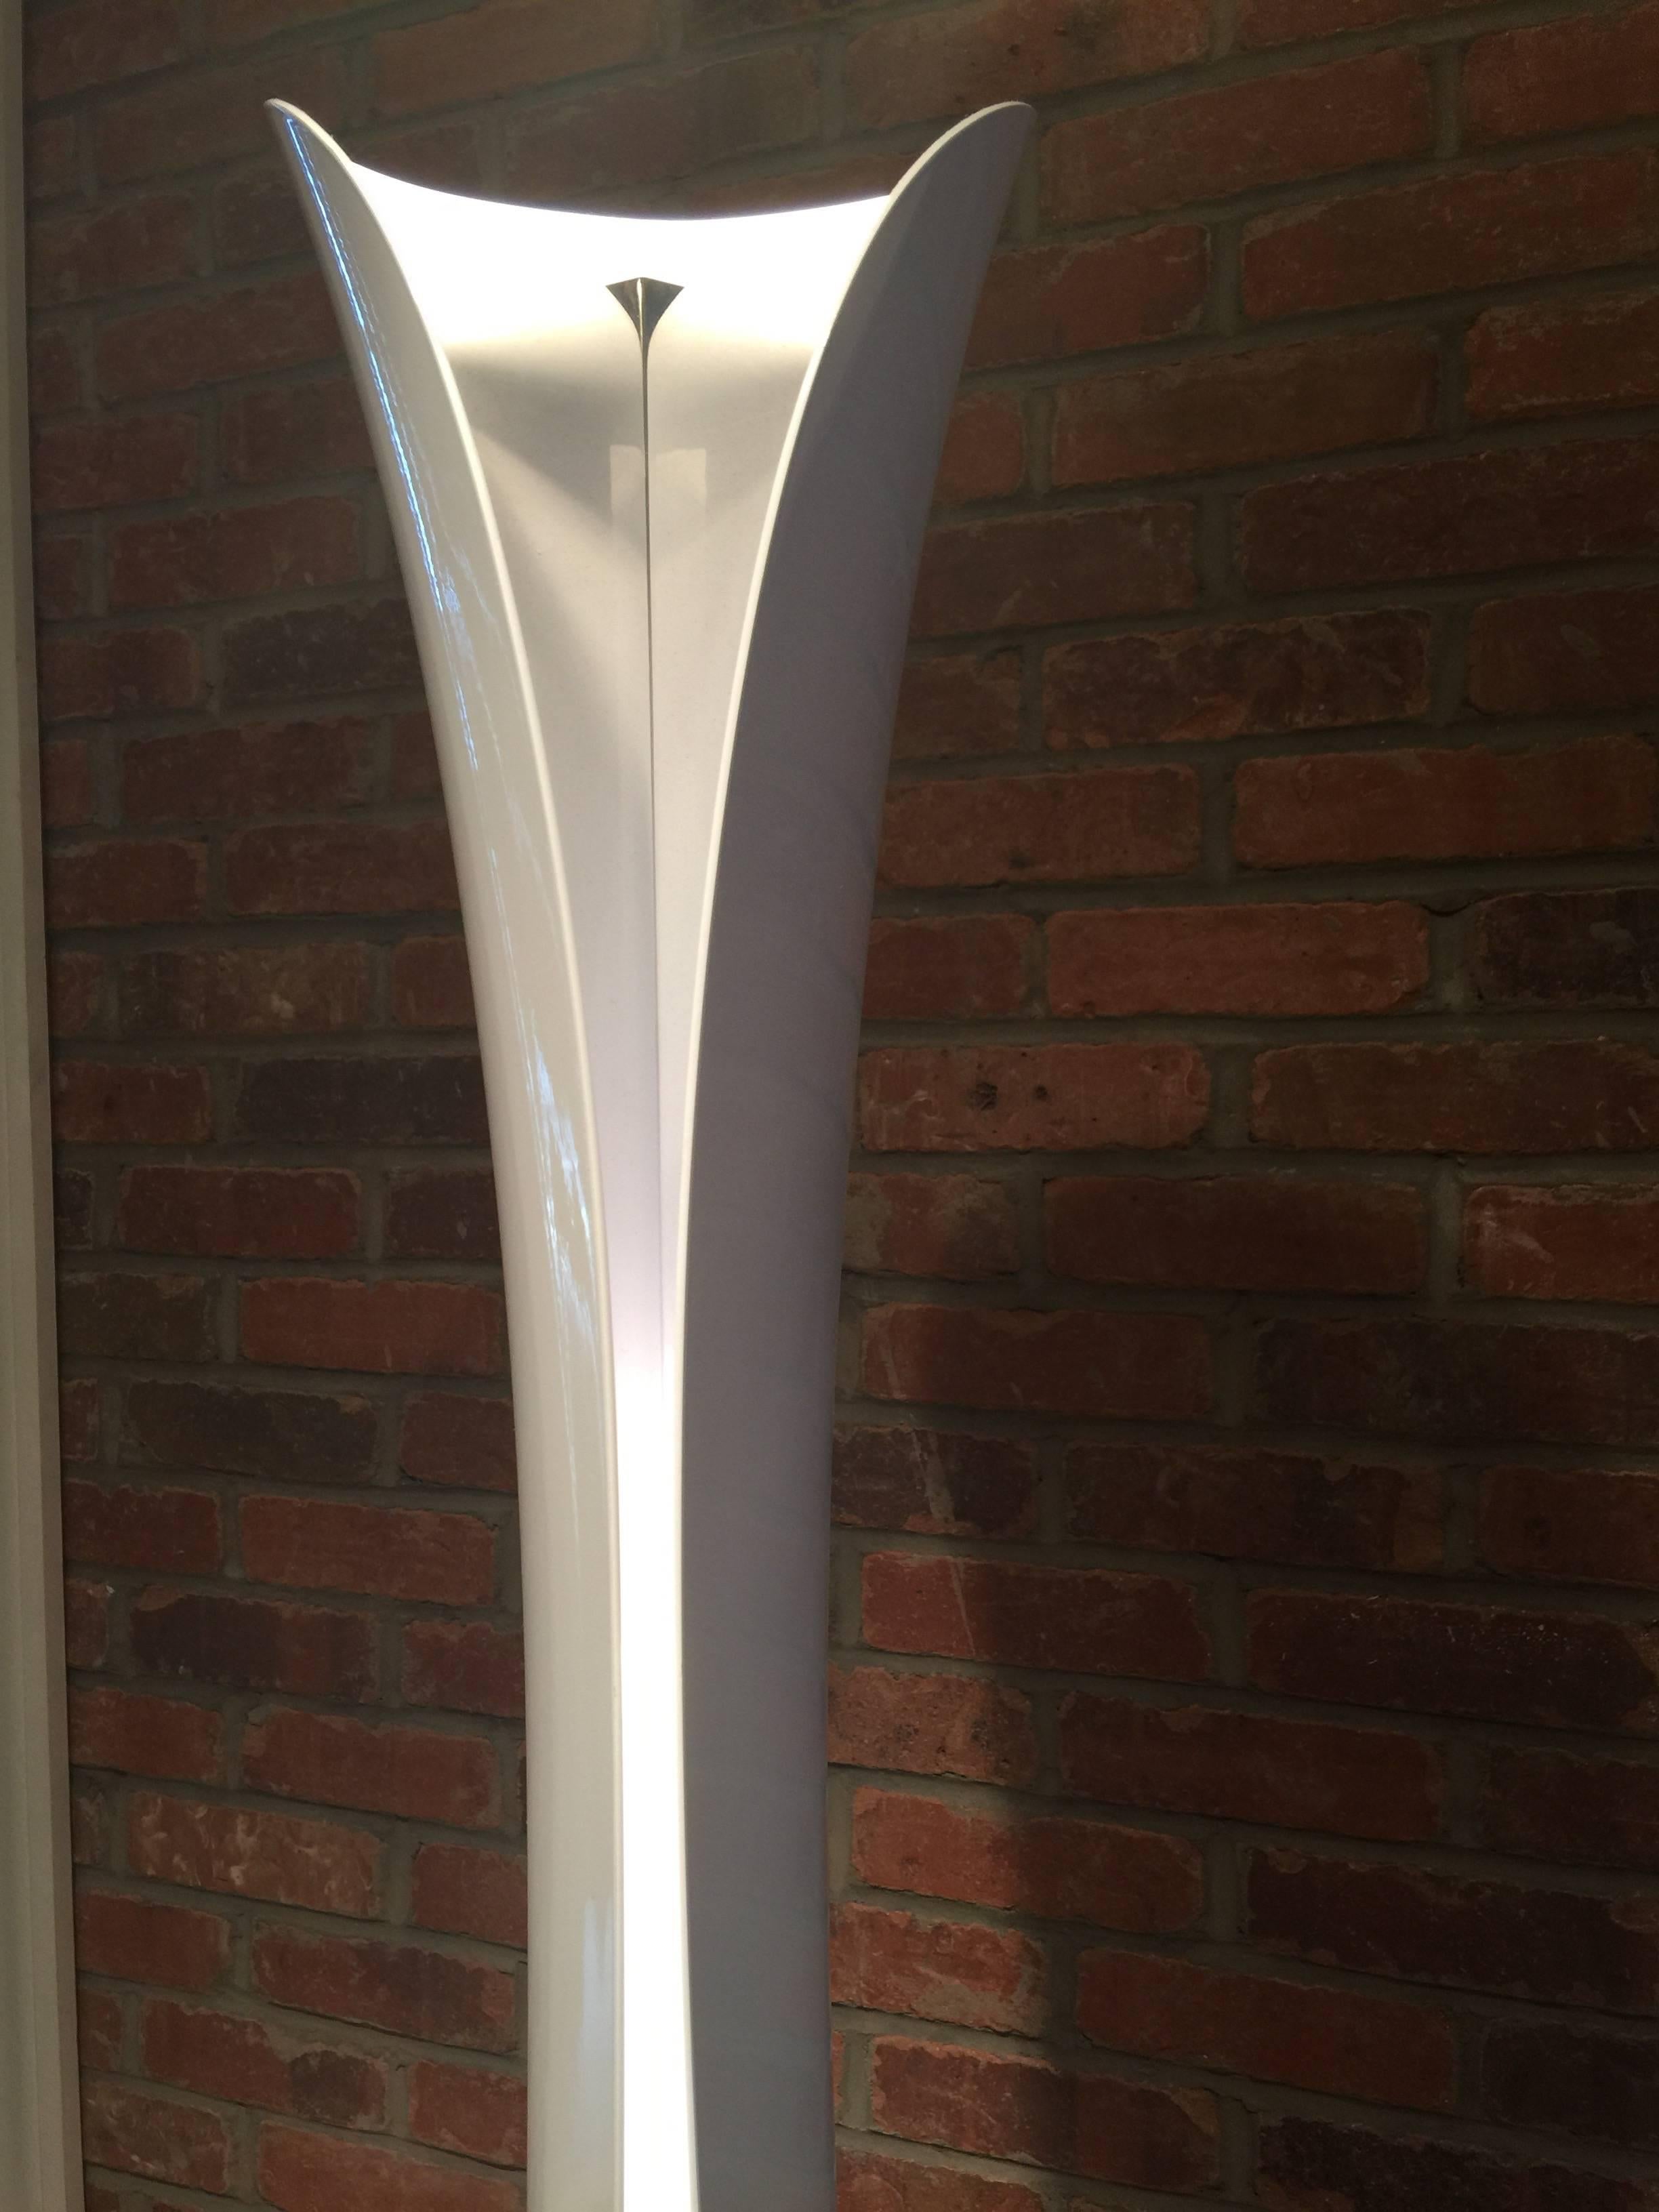 On sale! From display this beautiful floor lamp is on sale. Retail price is 2.195$ destined to become collector piece. The Cadmo floor lamp designed by Karim Rashid and manufacturer by Italian leading modern lighting brand Artemide is a true jewel.